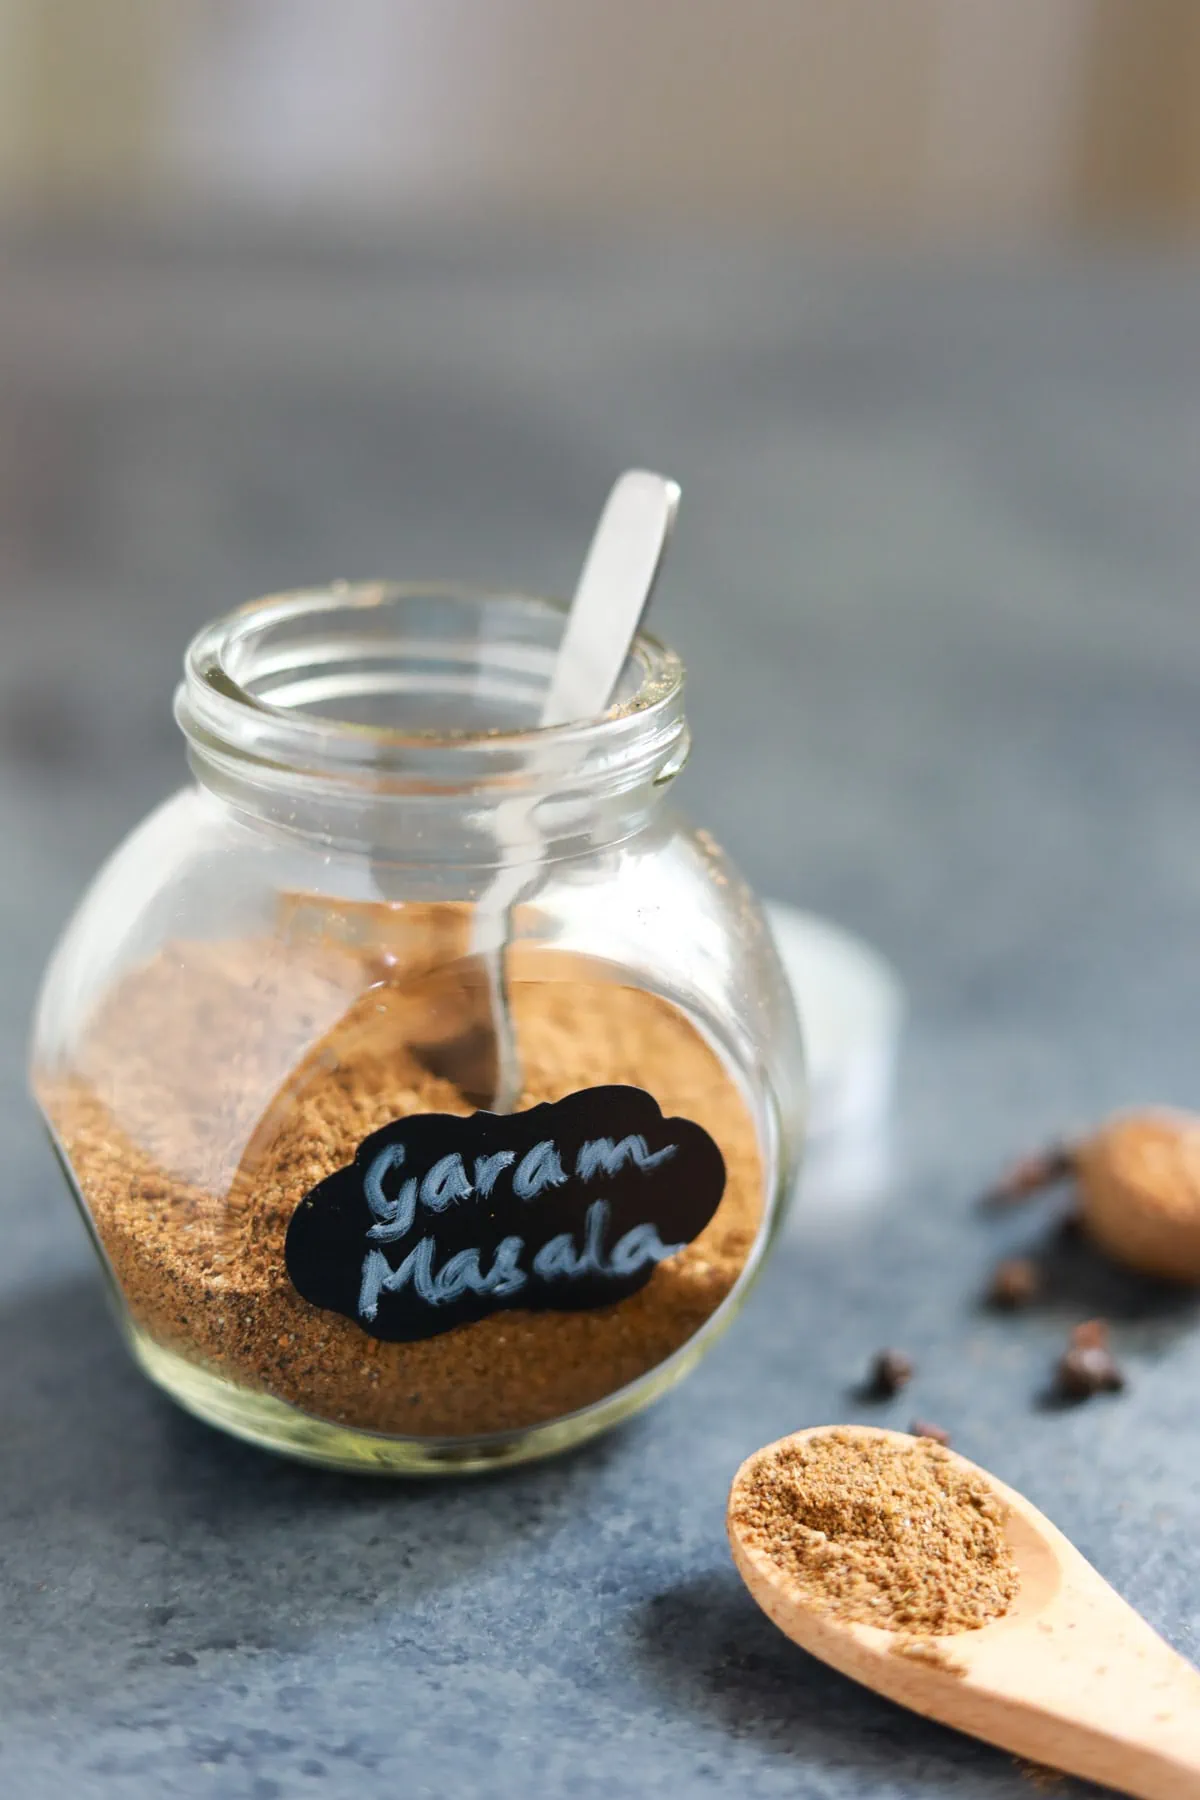 Punjabi garam masala seasoning in a glass container and in a spoon.